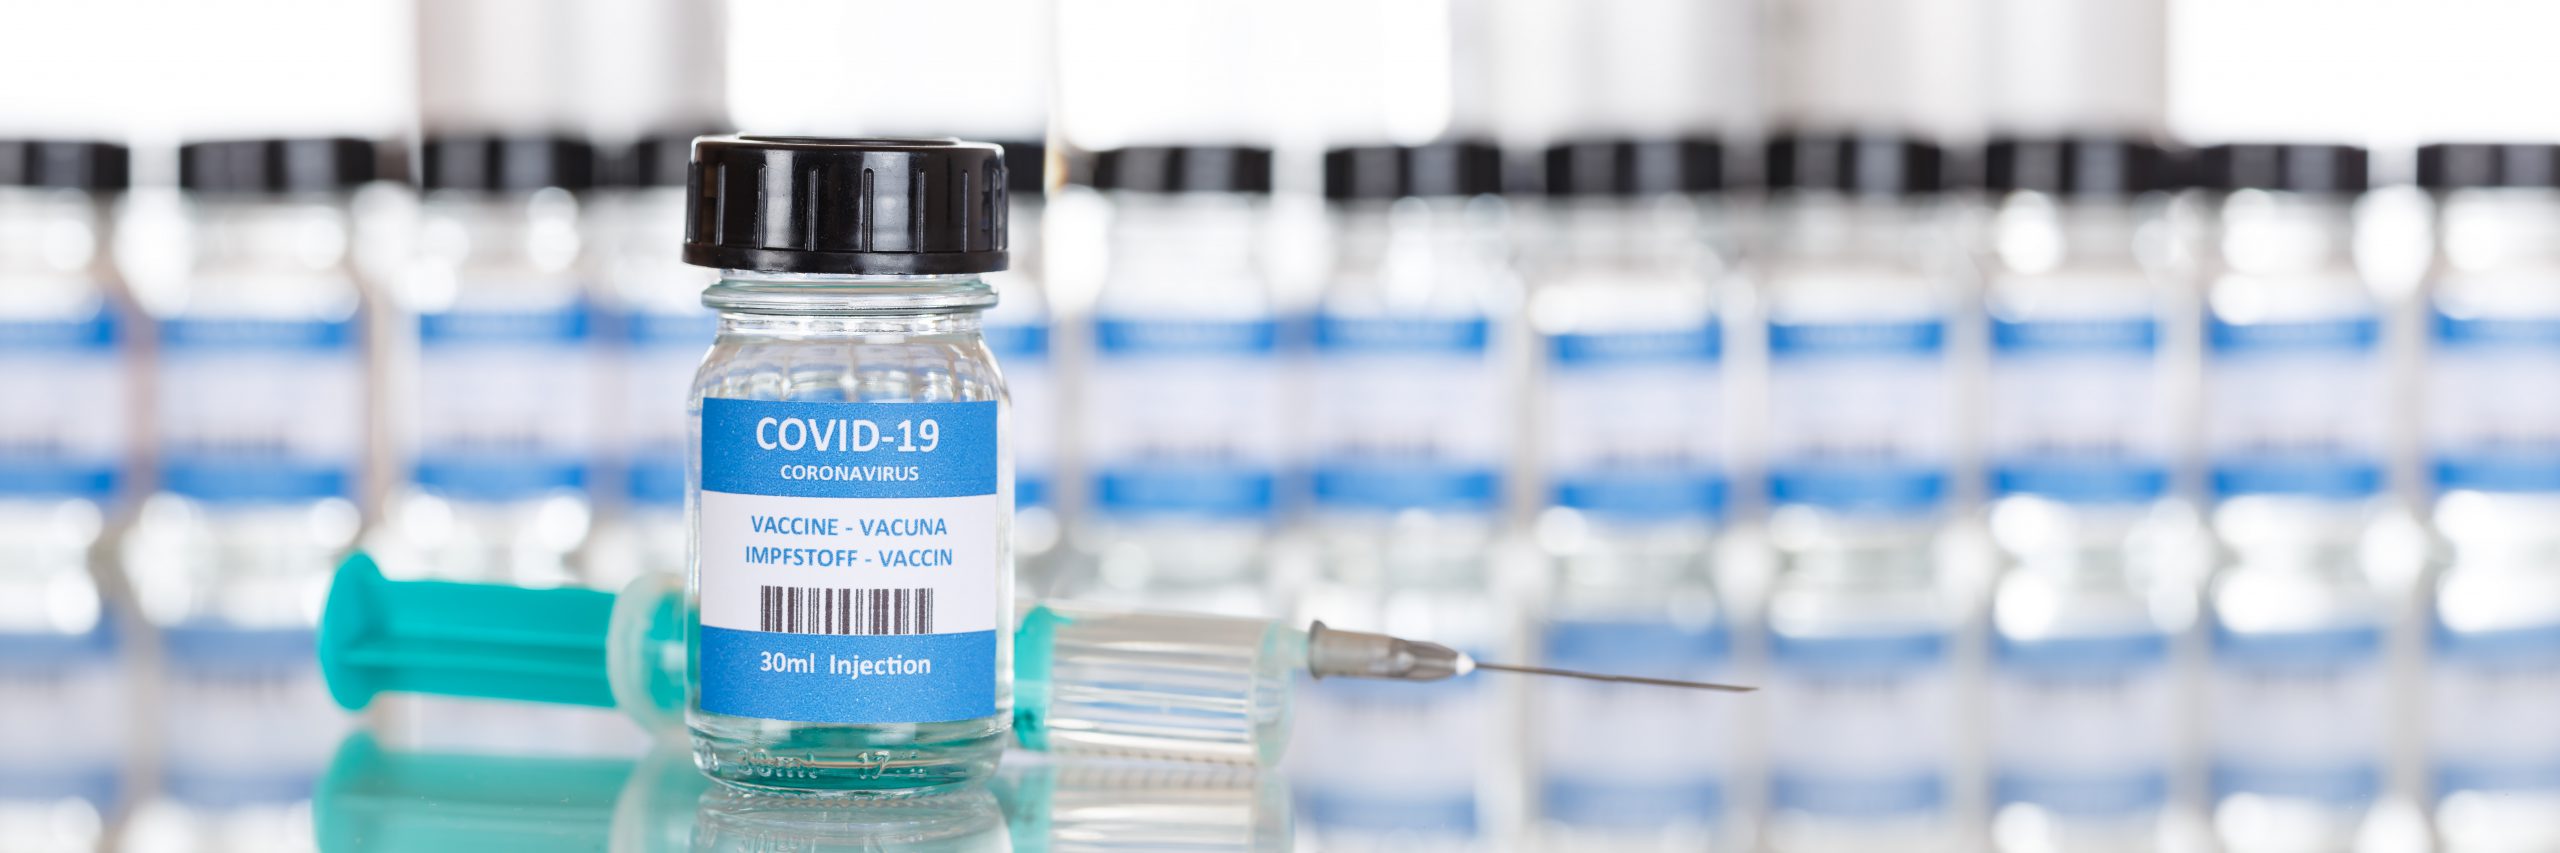 Can’t Get Vaccinated? Here’s Why